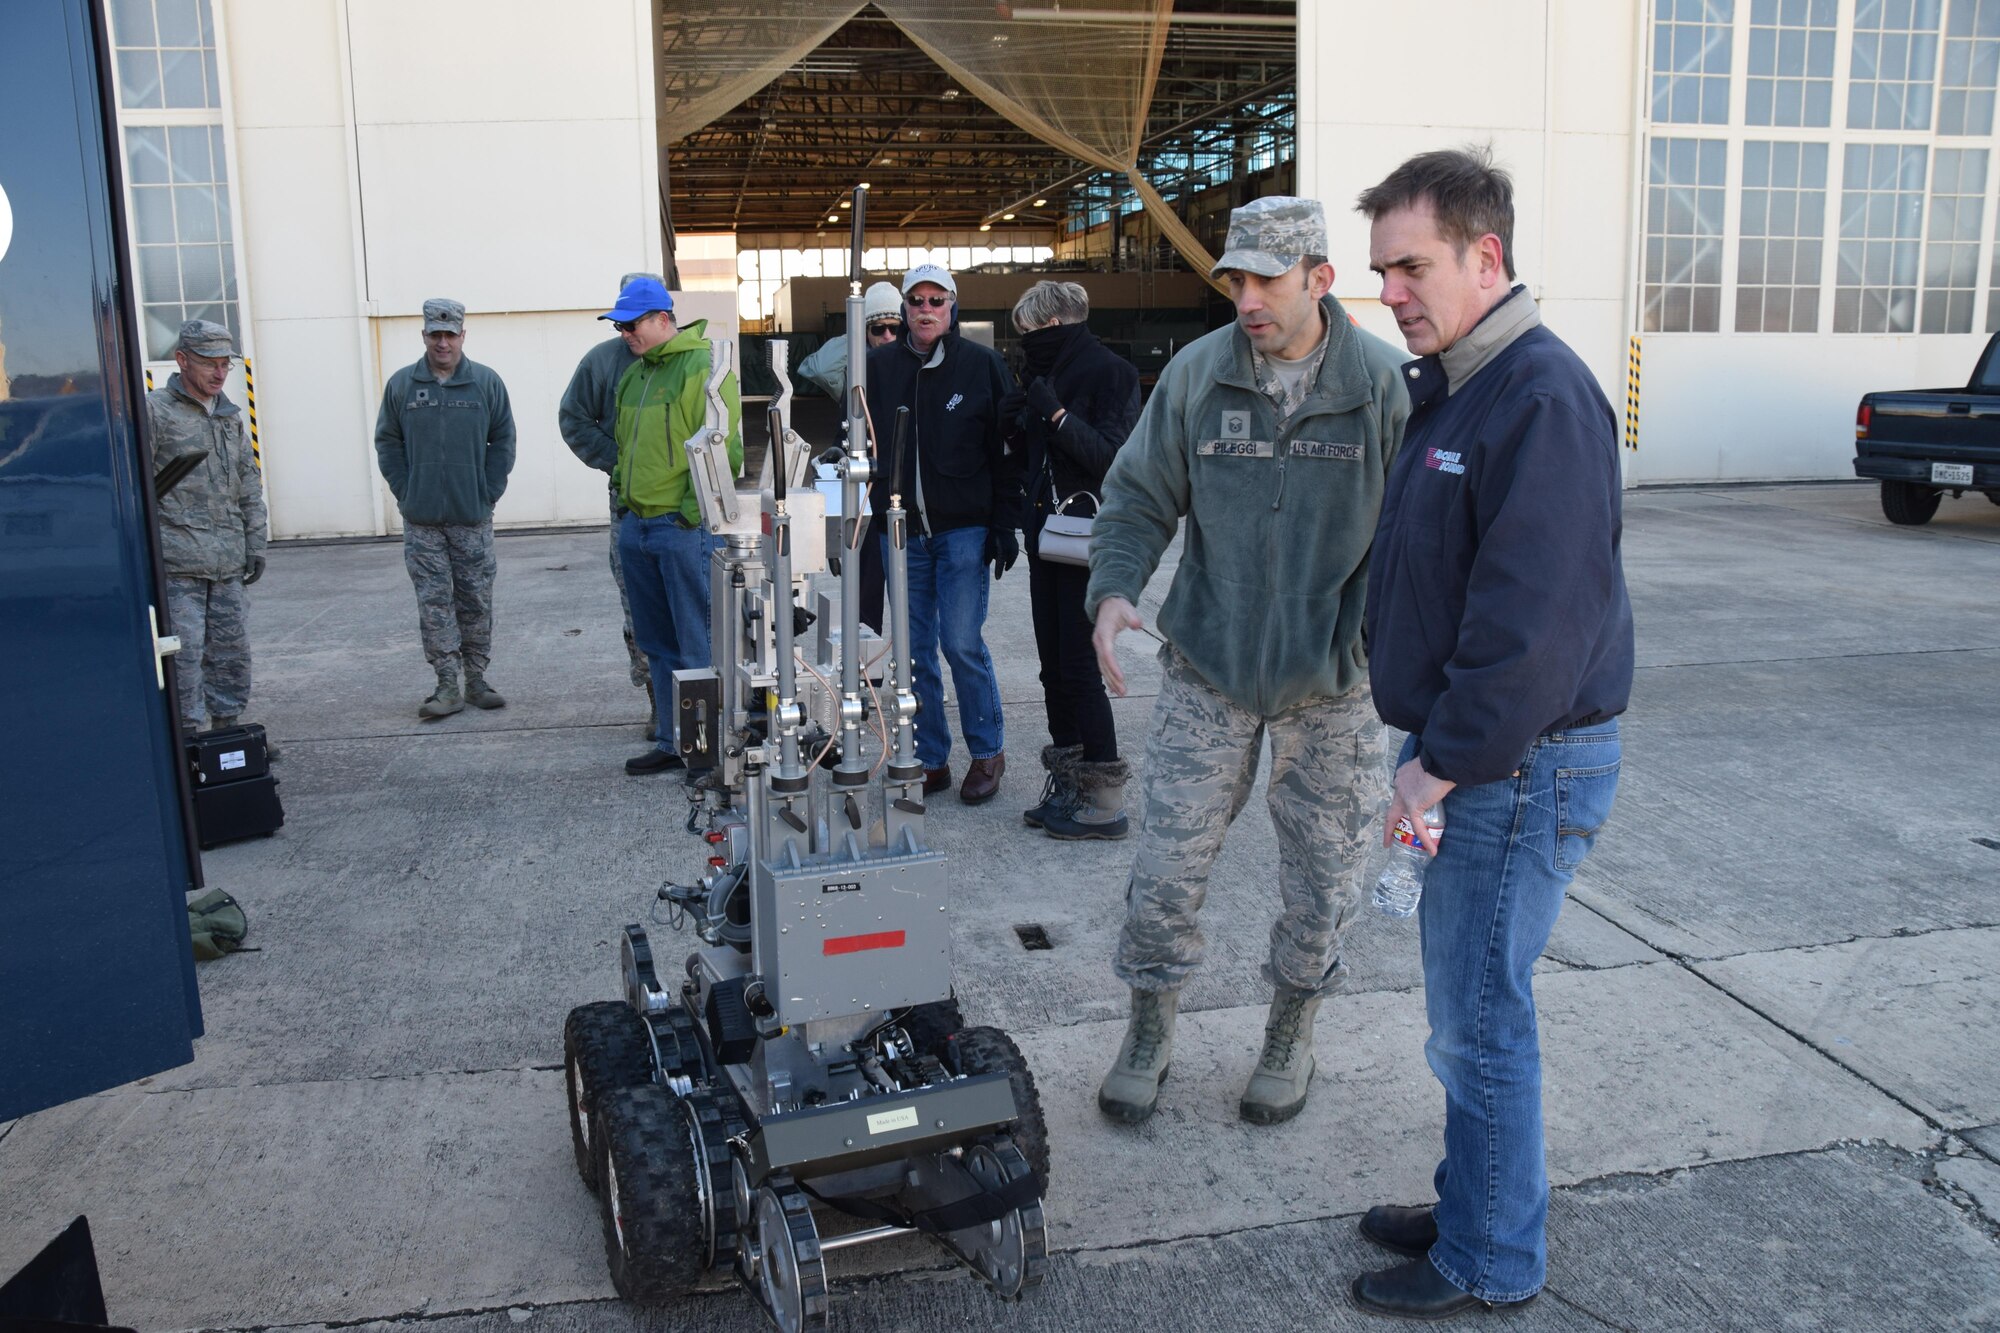 Master Sgt. Adam Pileggi, an explosive ordnance technician with the 433rd Civil Engineering Squadron, explains the features of the F 6 bomb disposal robot to Honorary Commander George Baillet (right) from the San Antonio Housing Commission Jan. 7, 2017 at Joint Base San Antonio-Lackland, Texas. The capabilities and technology used by the explosive ordnance disposal Airmen was part of the tour of the 433rd Mission Support Group. (U.S. Air Force photo/Tech. Sgt. Carlos J. Trevino) 